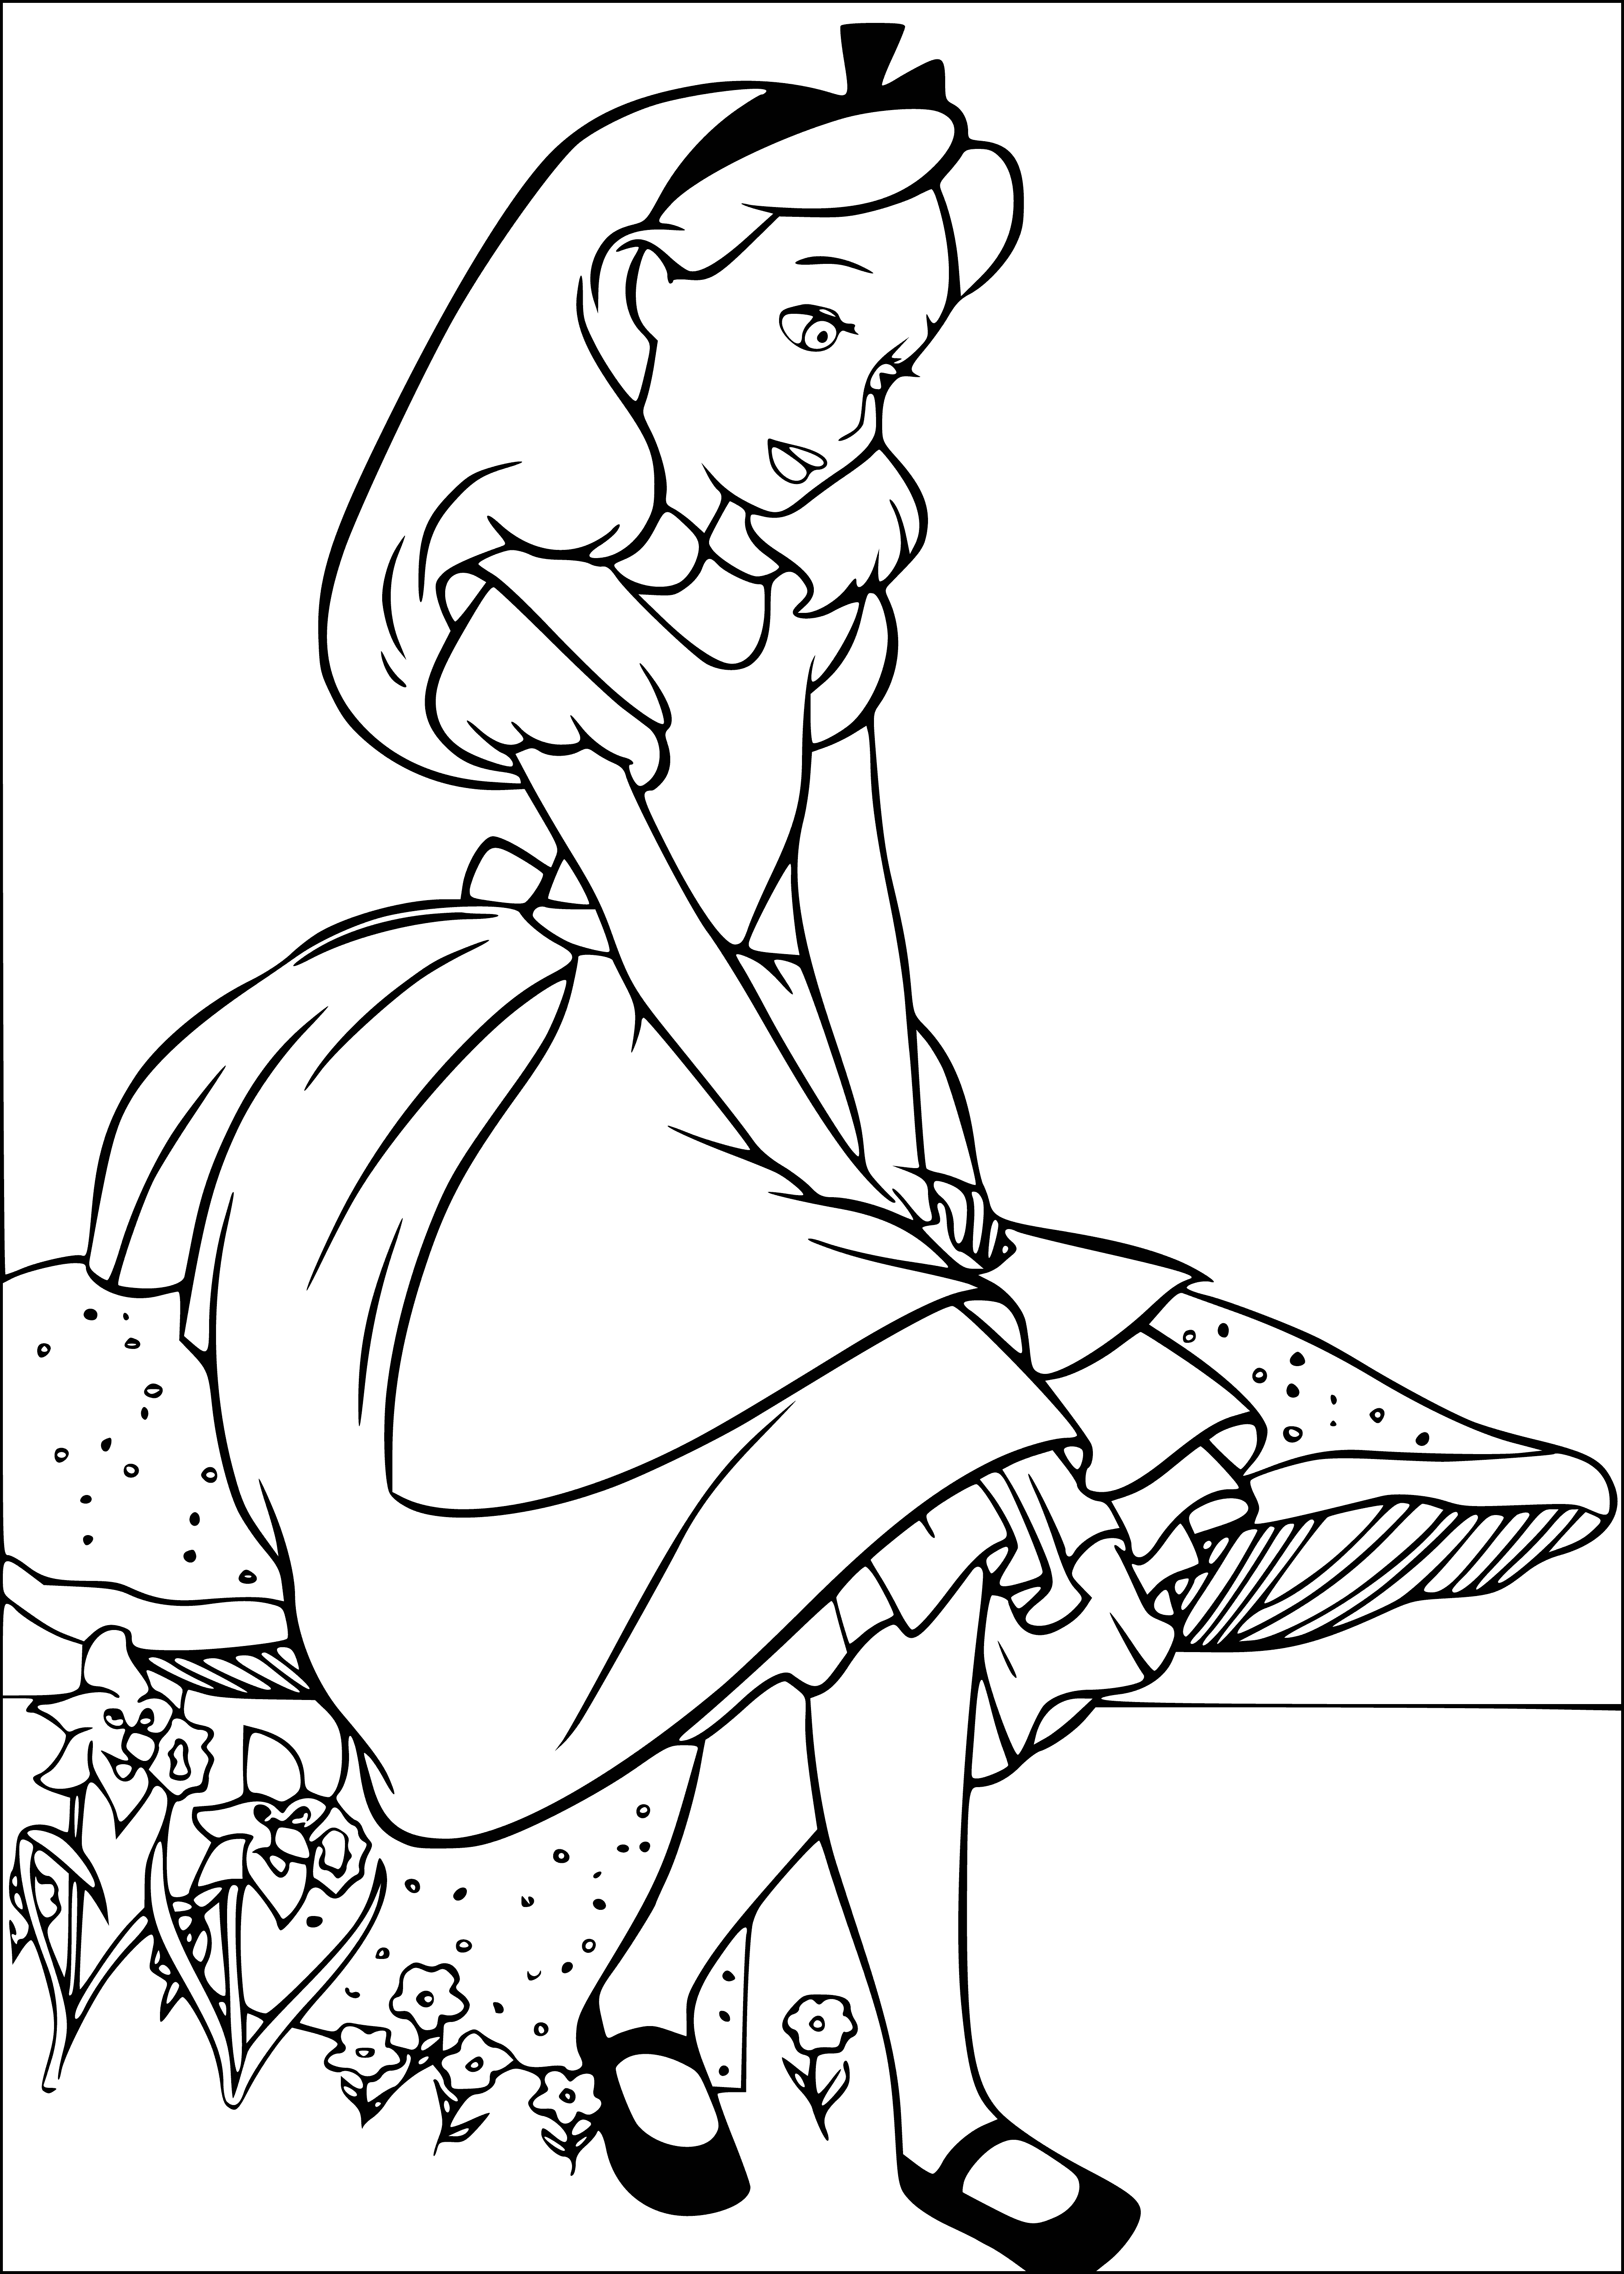 Bitten off the mushroom coloring page